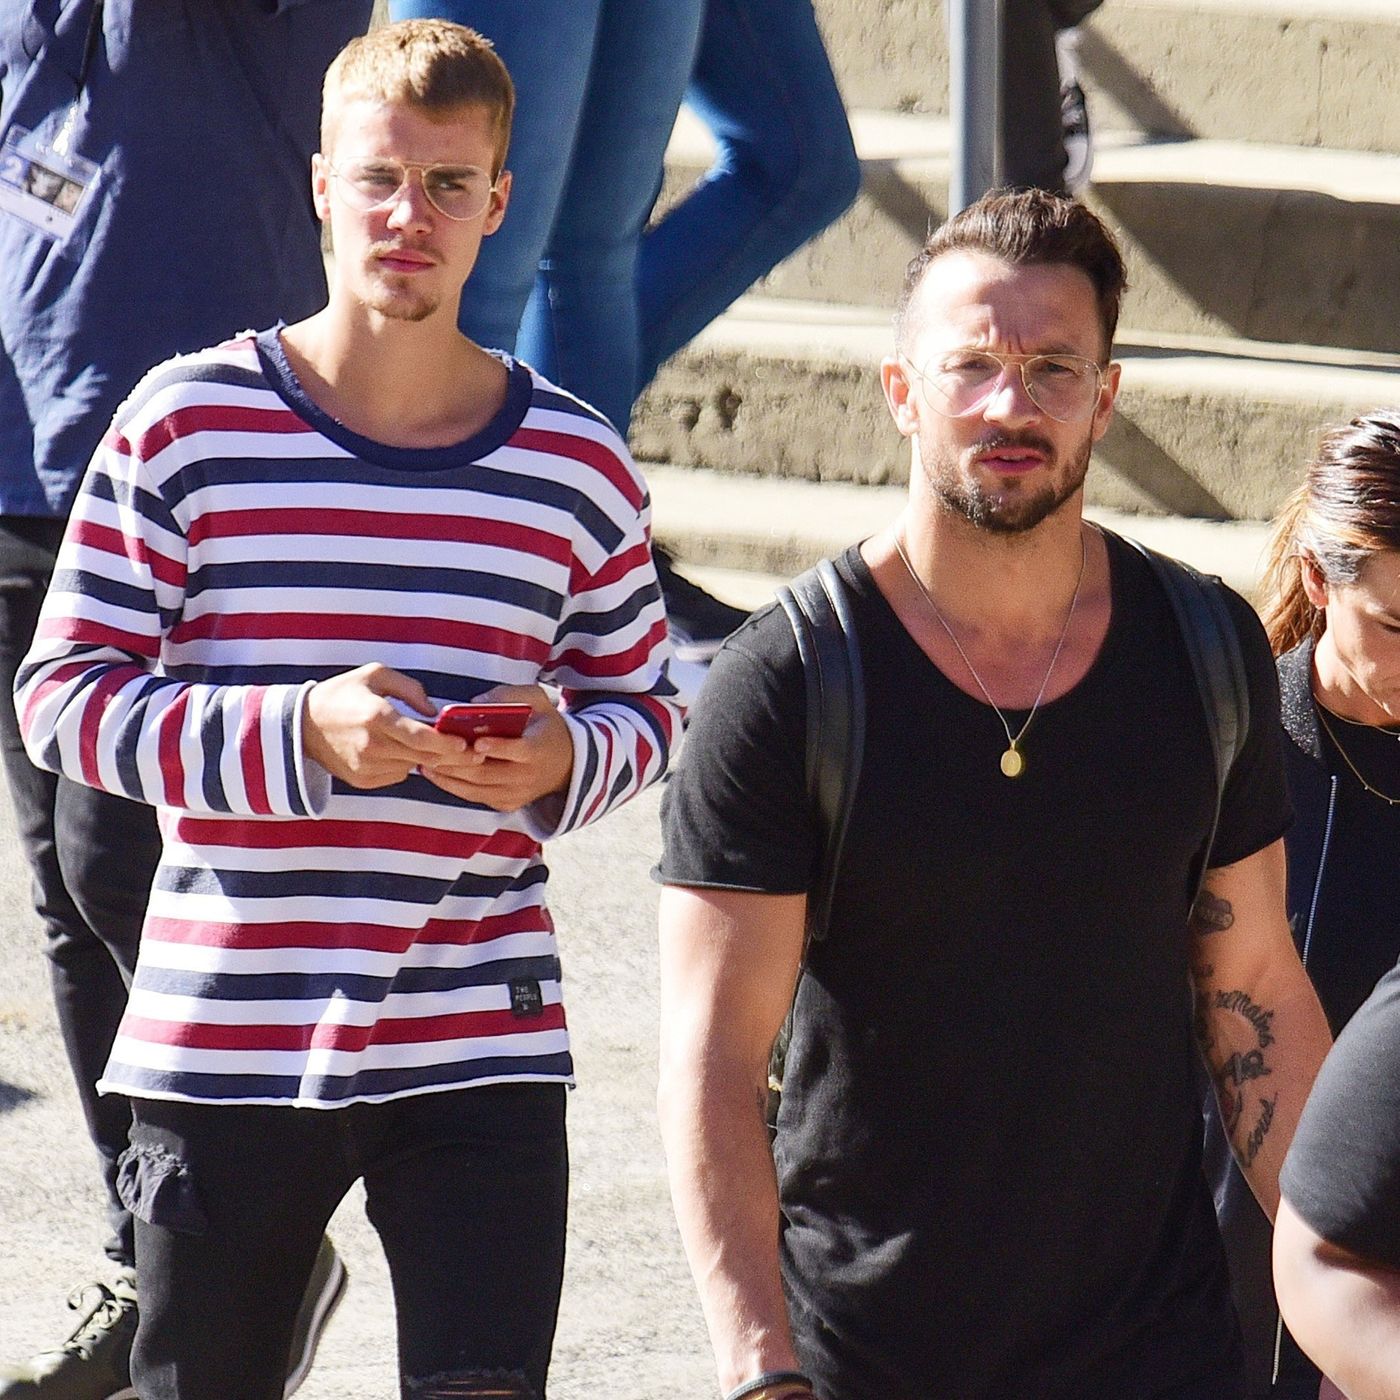 Stars Who Have Attended Hillsong Church: Justin Bieber, More